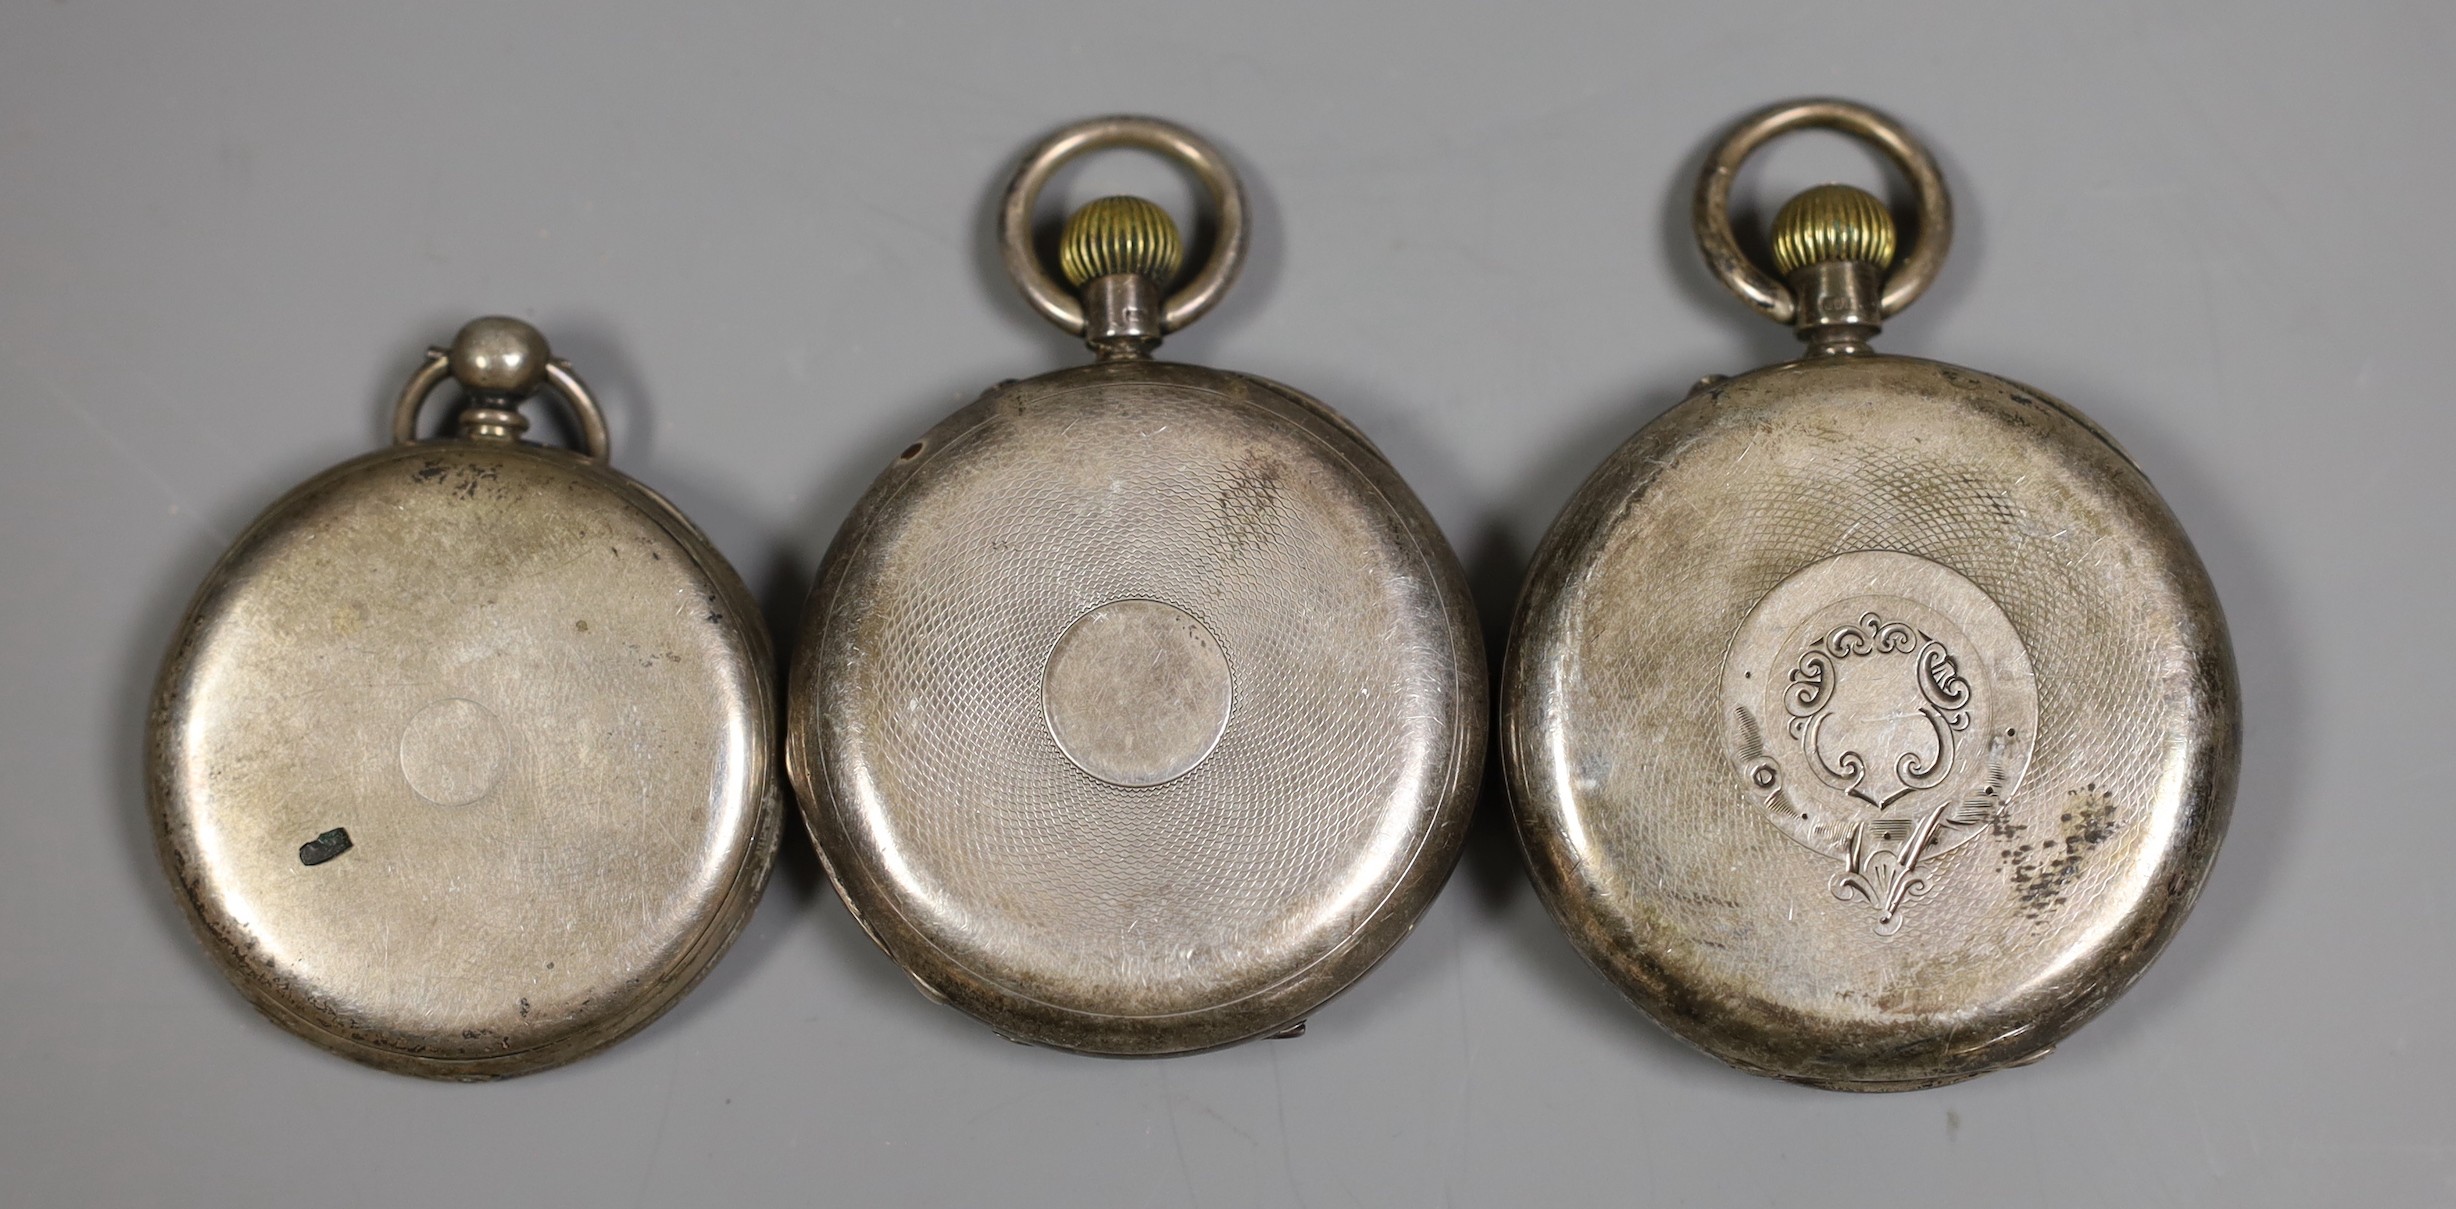 Two silver pocket watches including half hunter and one other white metal open faced pocket watch( - Image 2 of 3